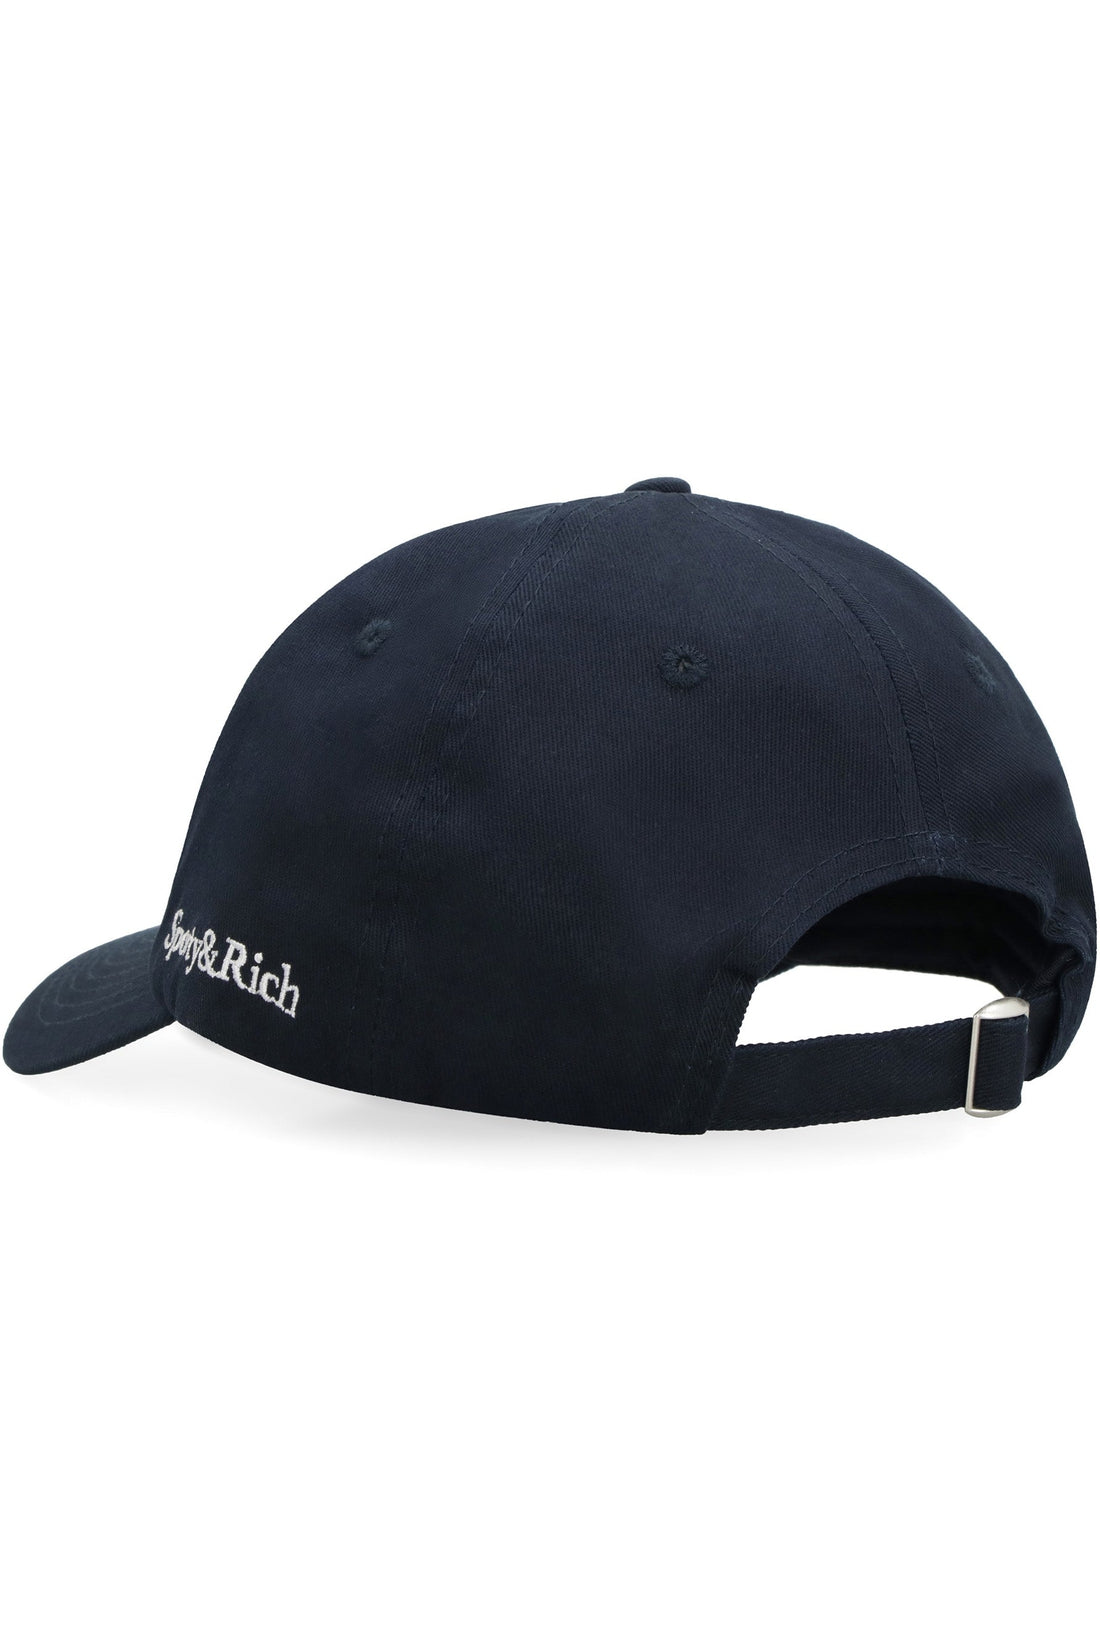 Sporty & Rich-OUTLET-SALE-Embroidered baseball cap-ARCHIVIST